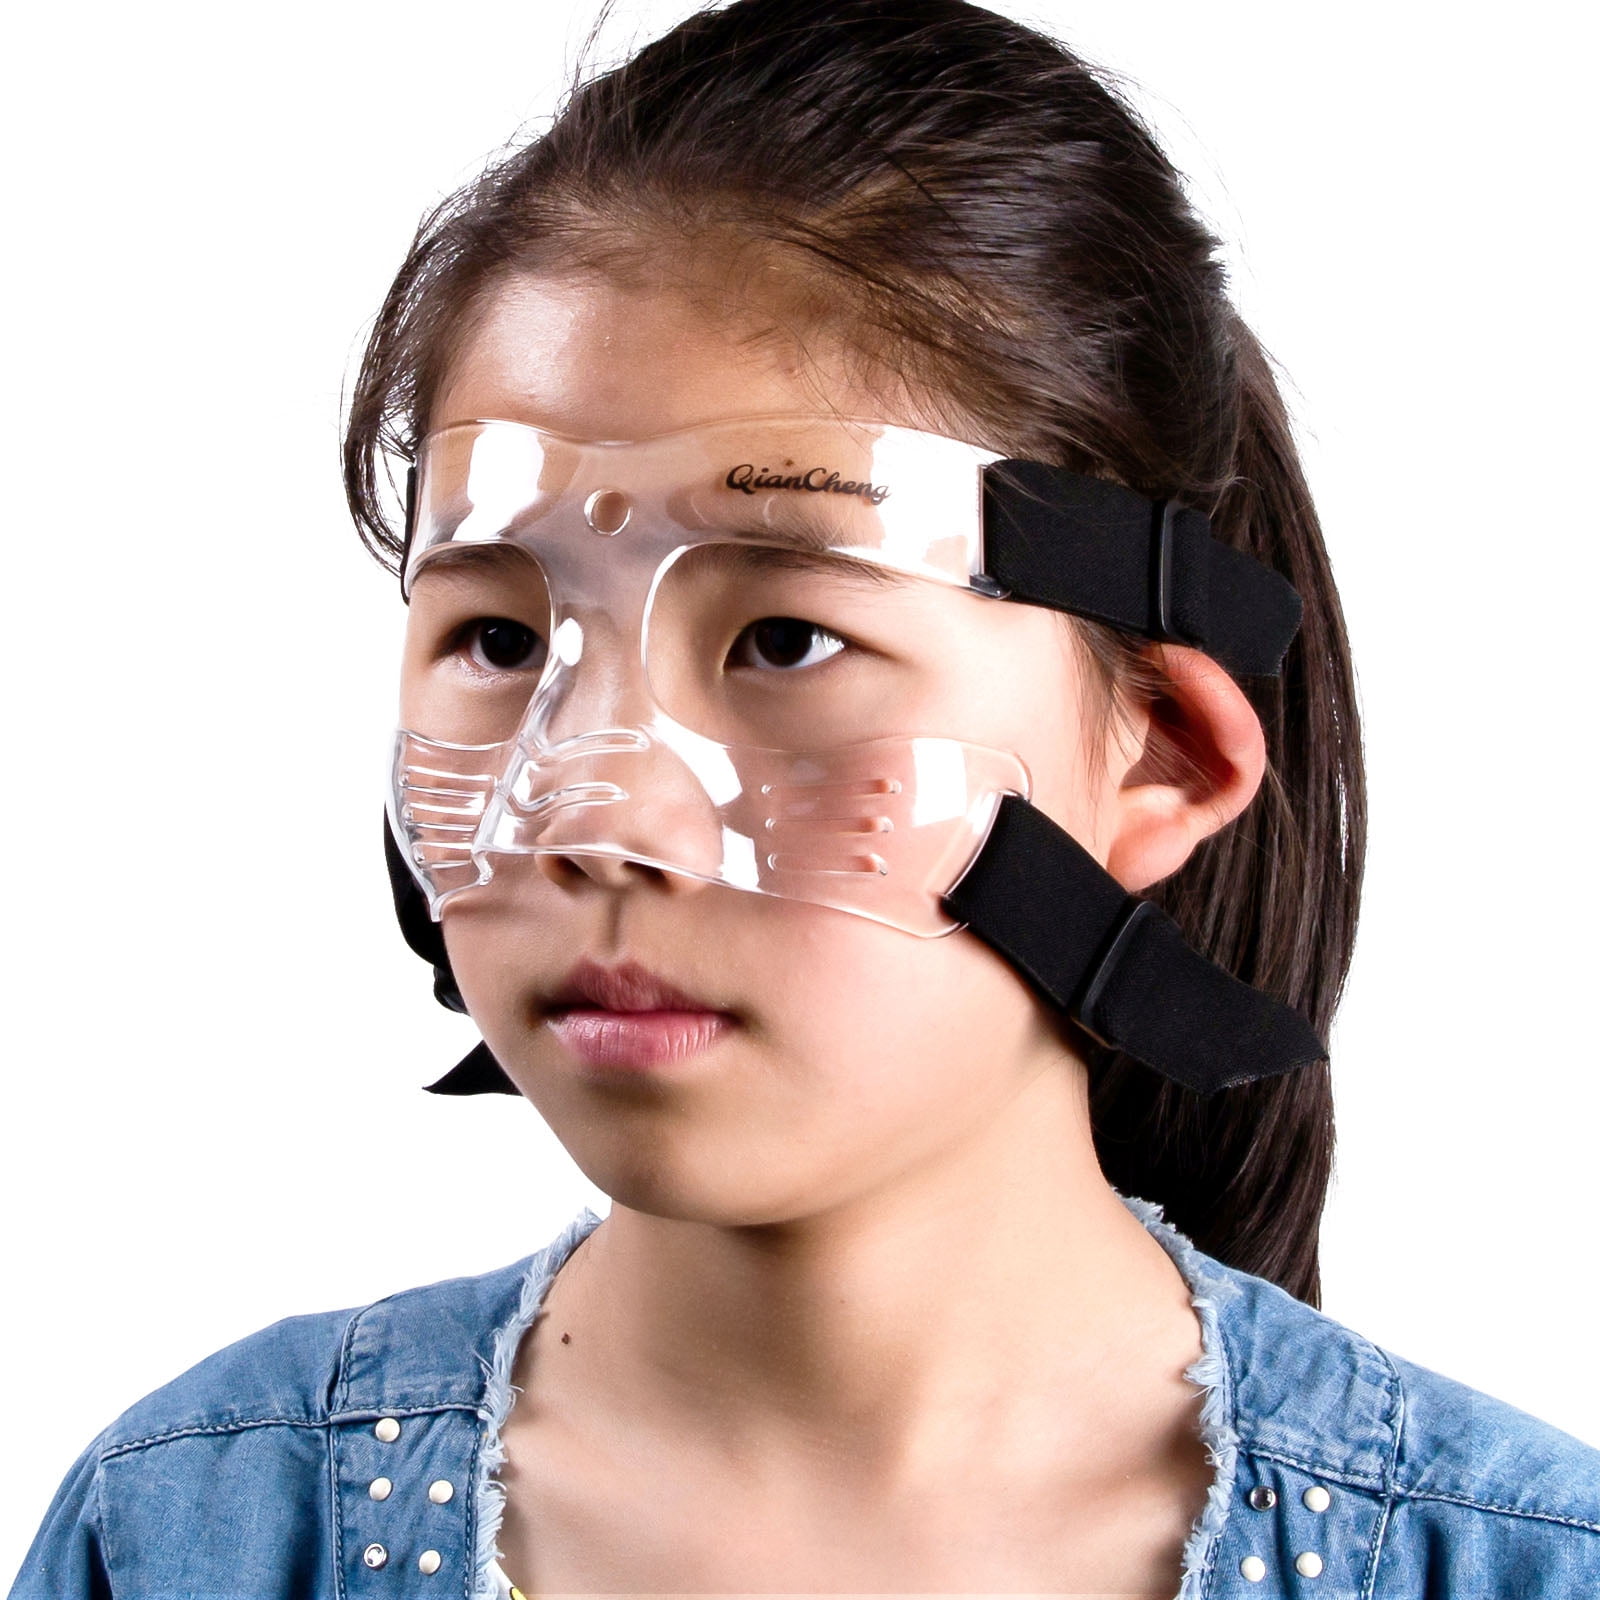 Qiancheng Nose Guard for Broken - Adjustable Face Guard with Padding Bag - Face Shield, Protection from Impact Injuries to and Face for Children Teenagers - Walmart.com